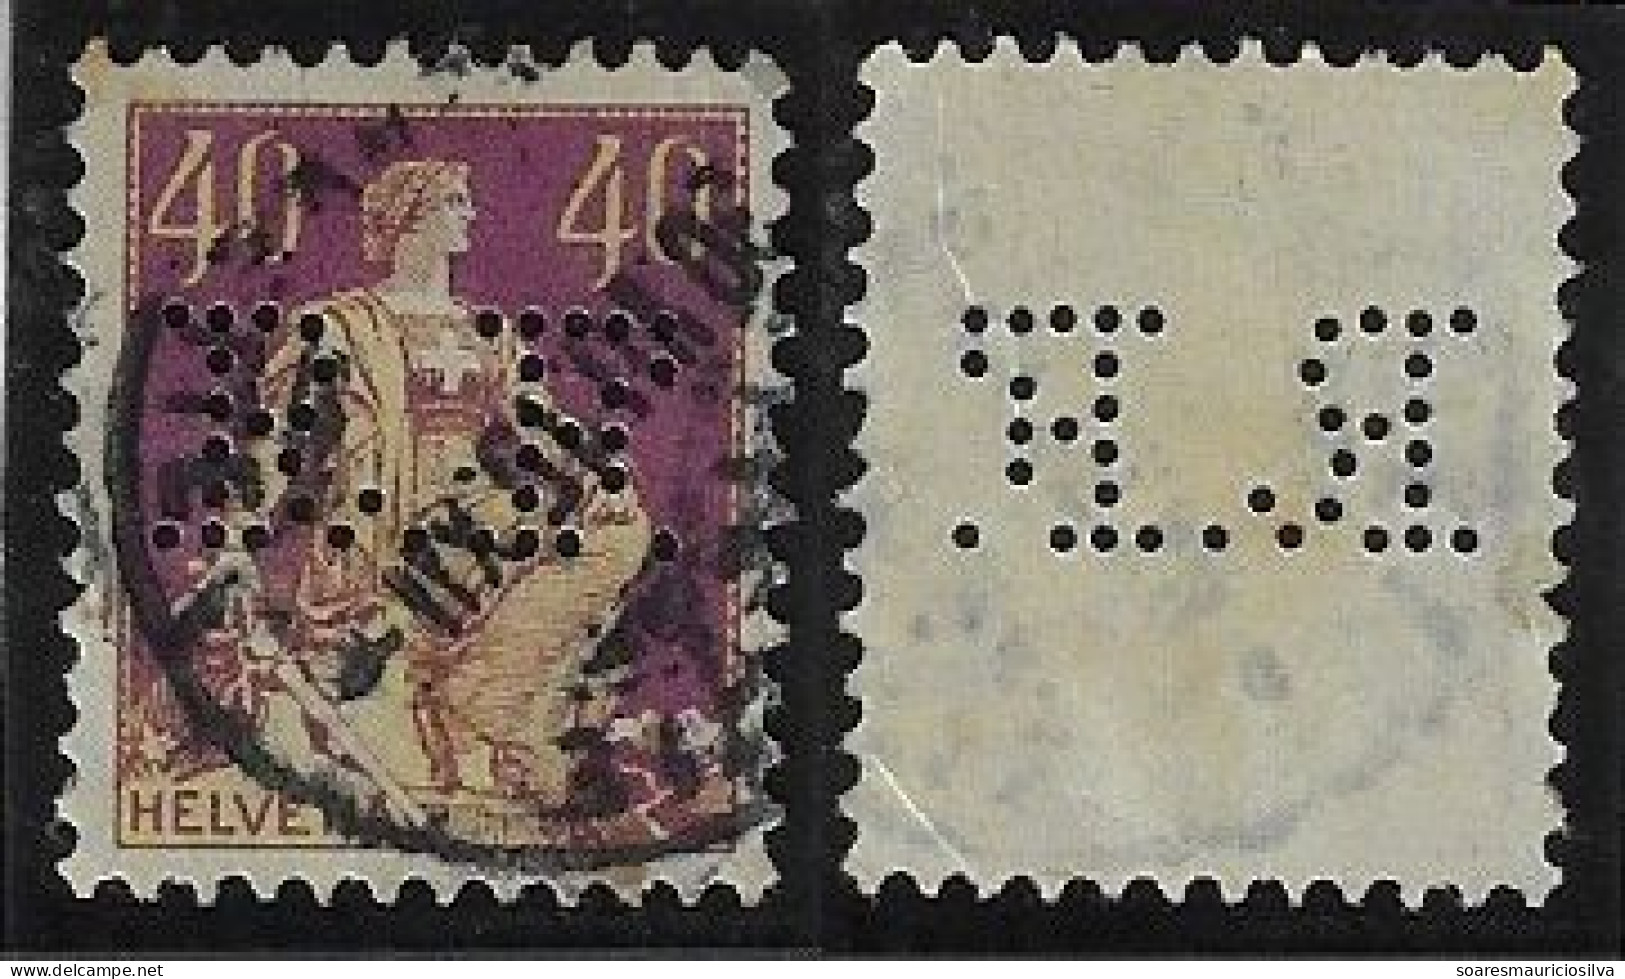 Switzerland 1913/1934 Stamp With Perfin R.F. By Randon-Friederich SA From Chene-Bourg GE Lochung Perfore - Perforés